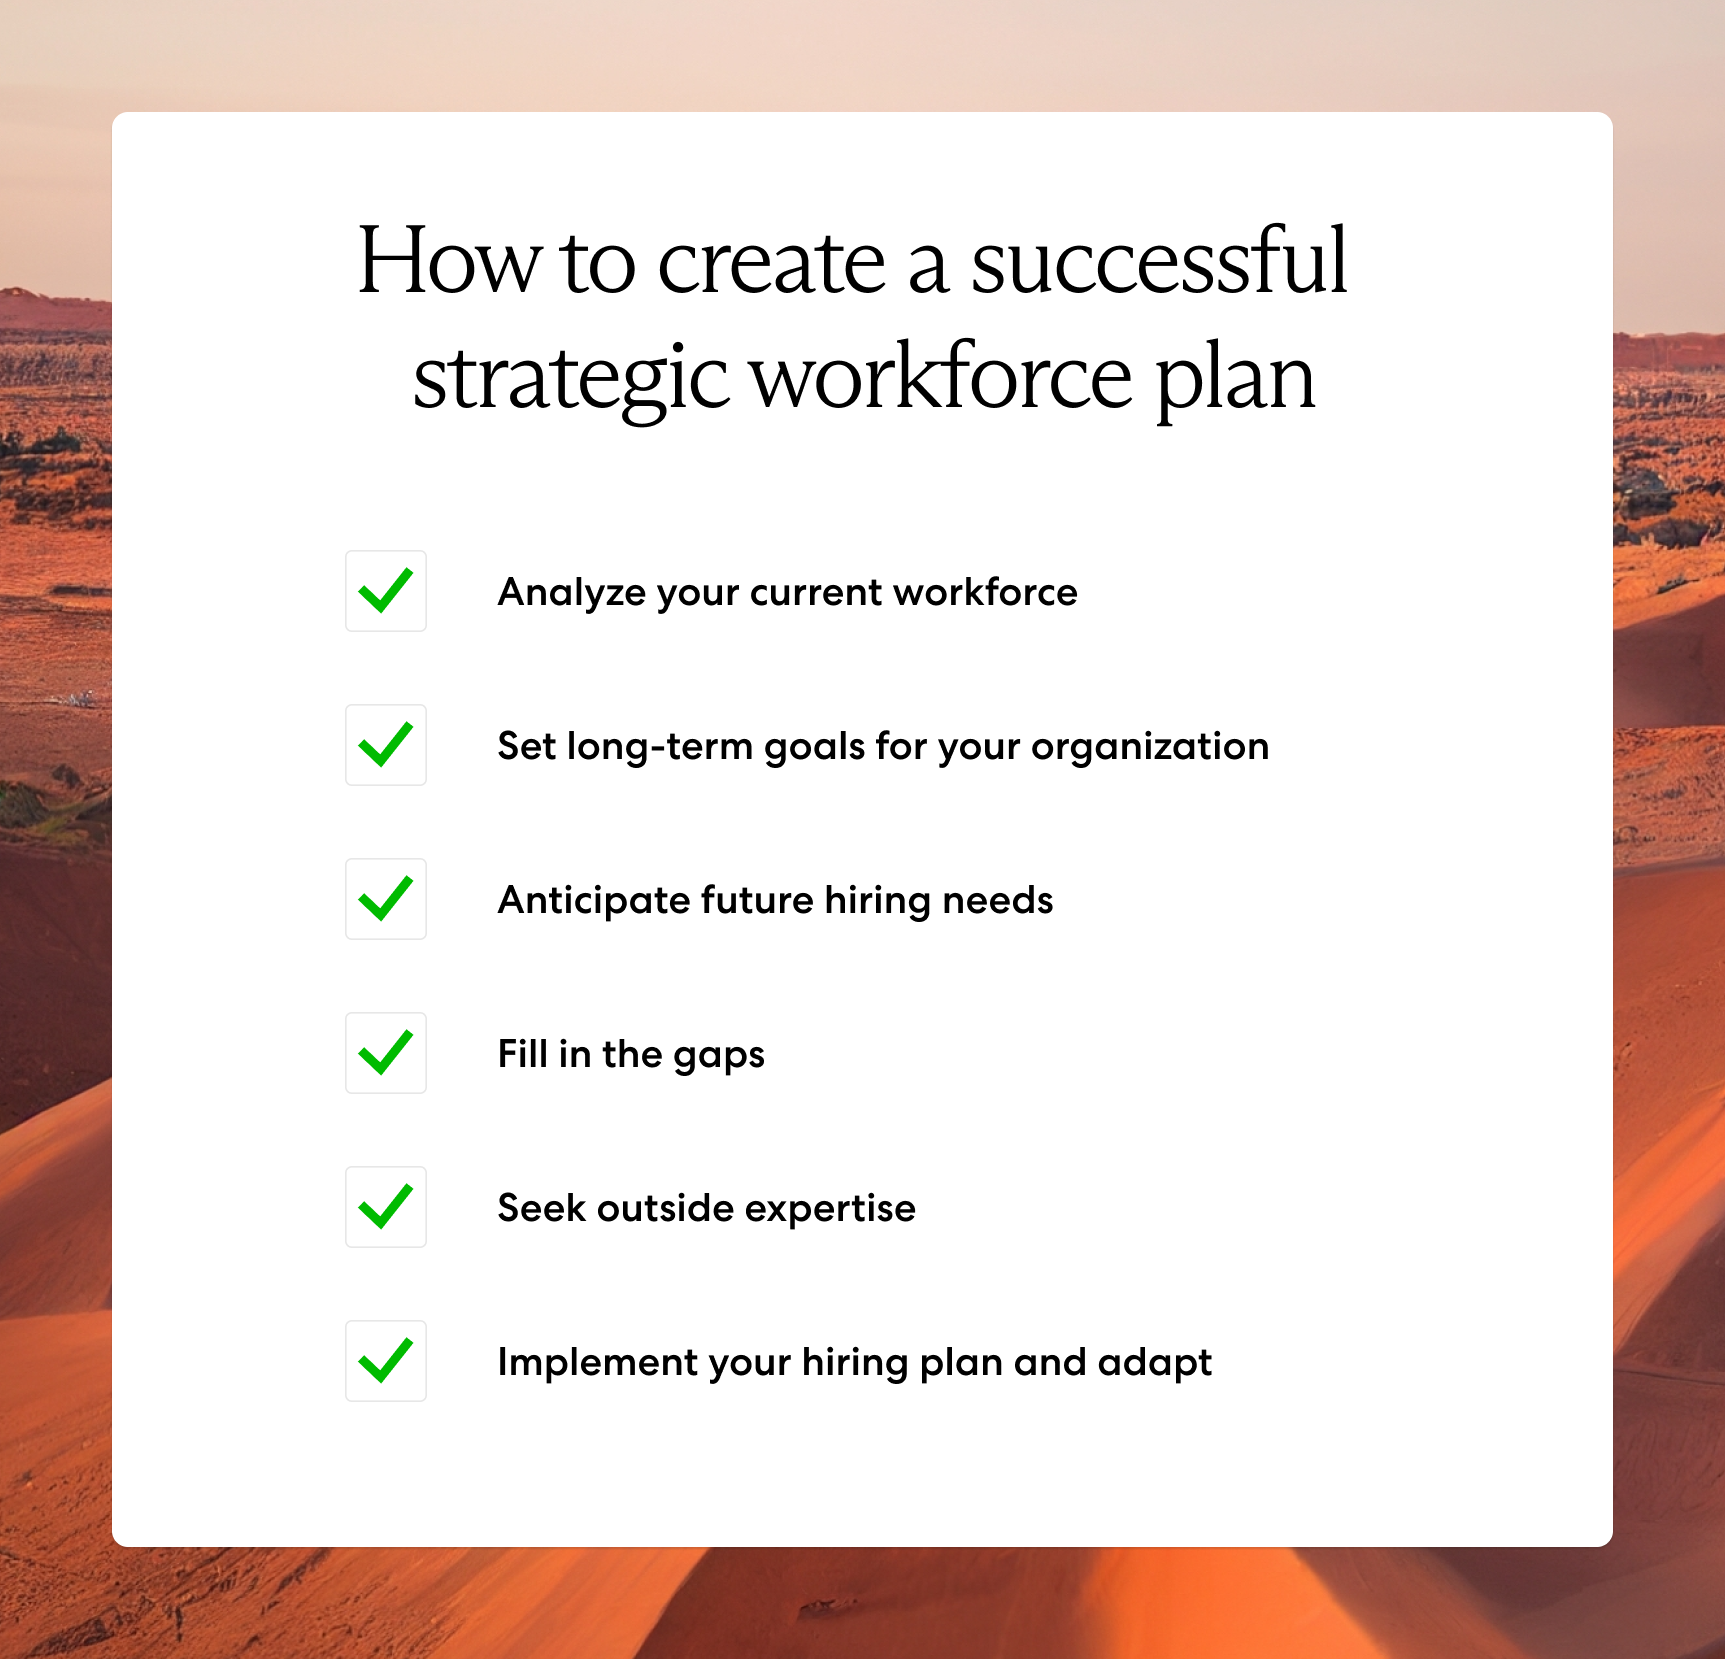 How to create a successful strategic workforce plan